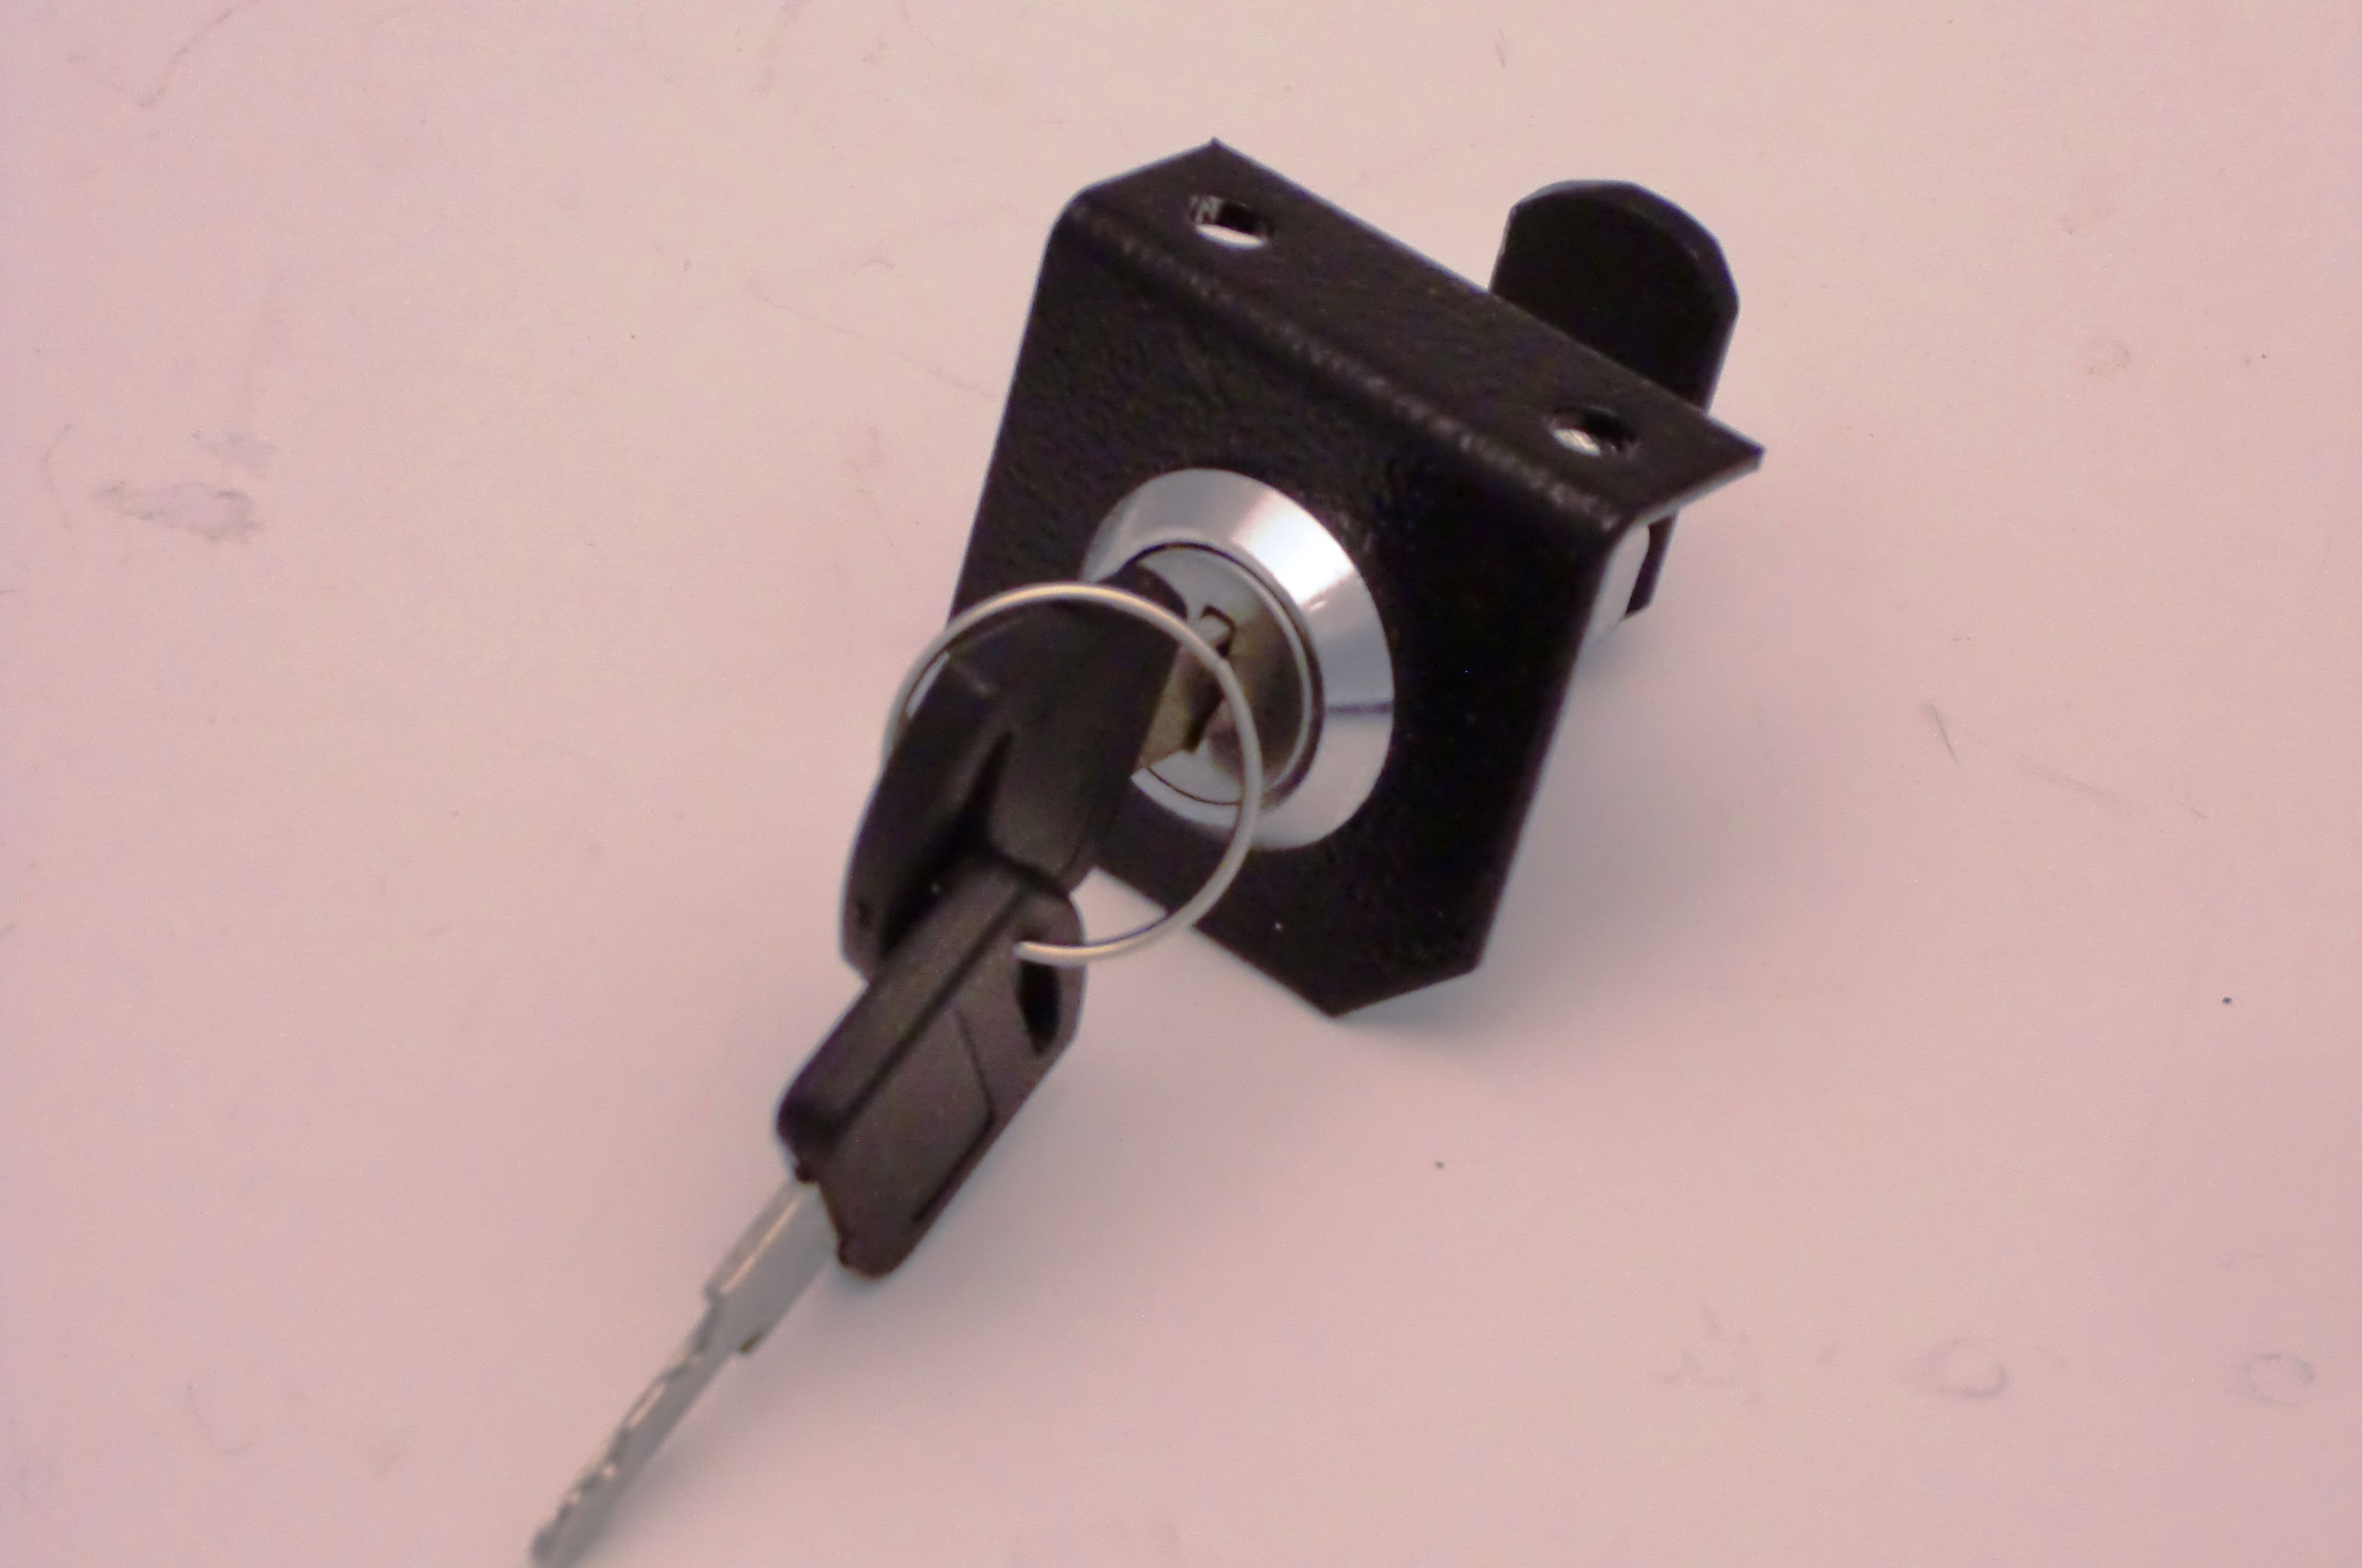 Staycold Hinged door lock and key - not universal